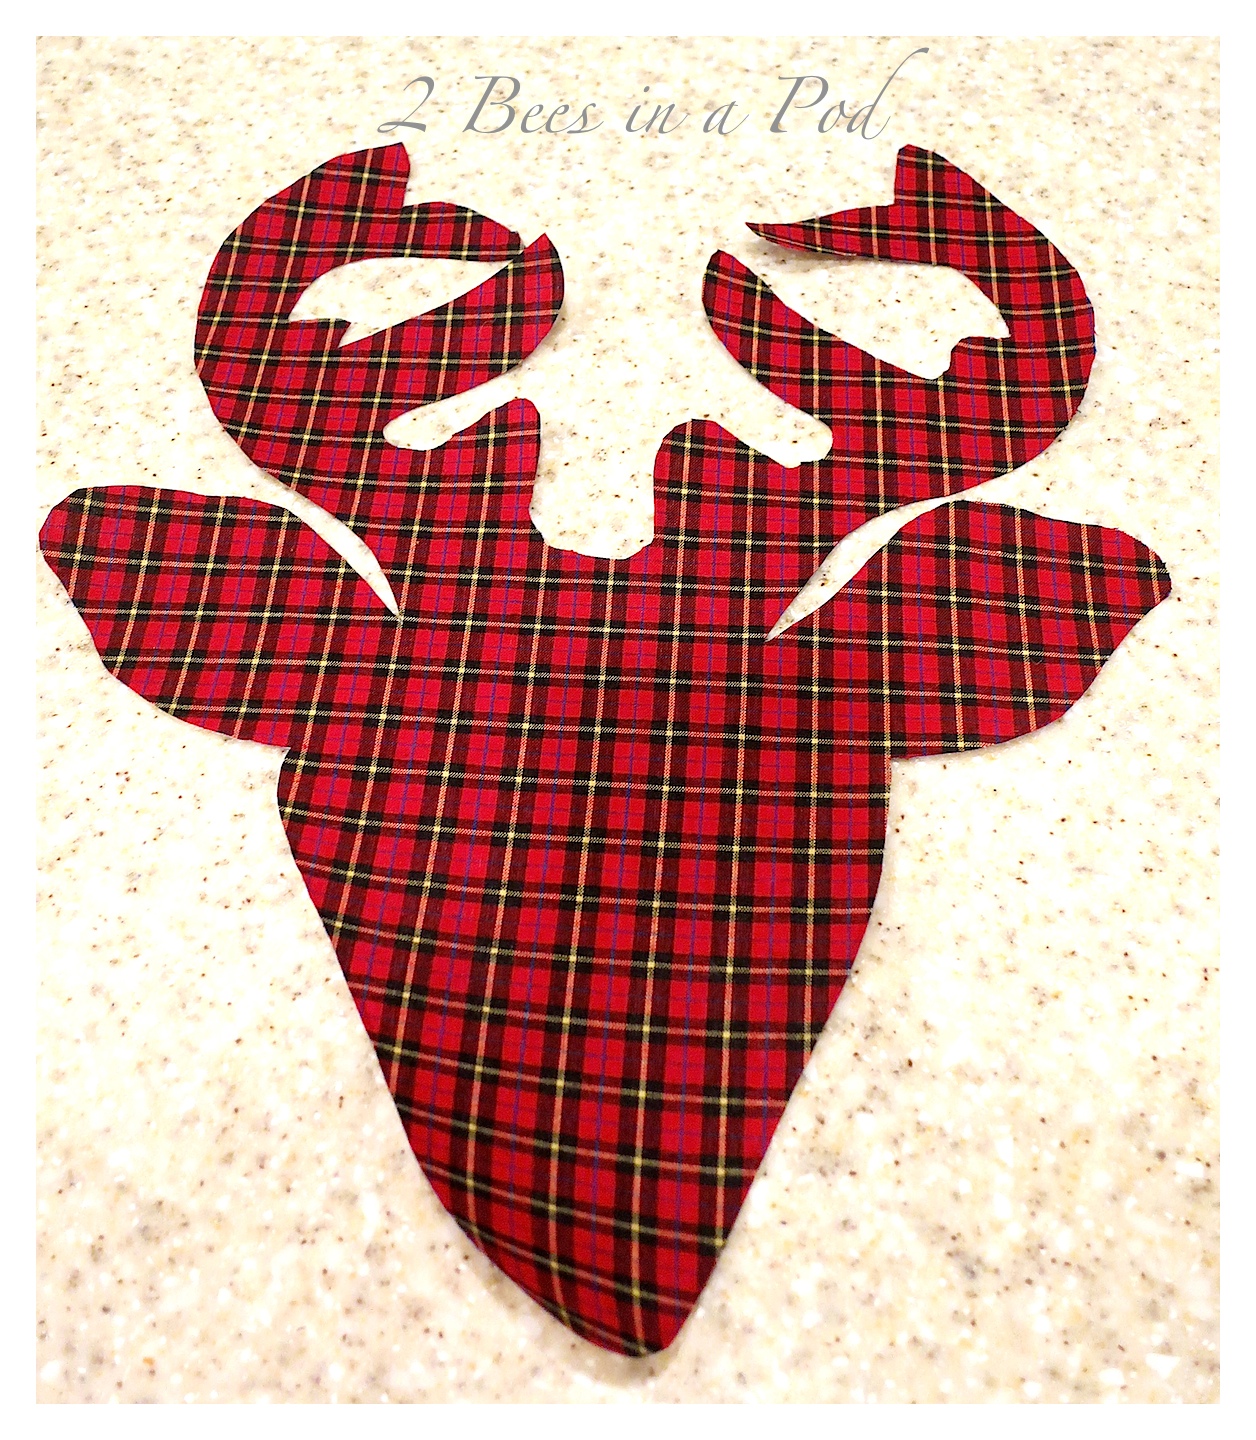 DIY Reindeer Silhouette Burlap Tote Bag. Cute as a gift or for your personal use Christmas shopping. Plaid reindeer cutout.